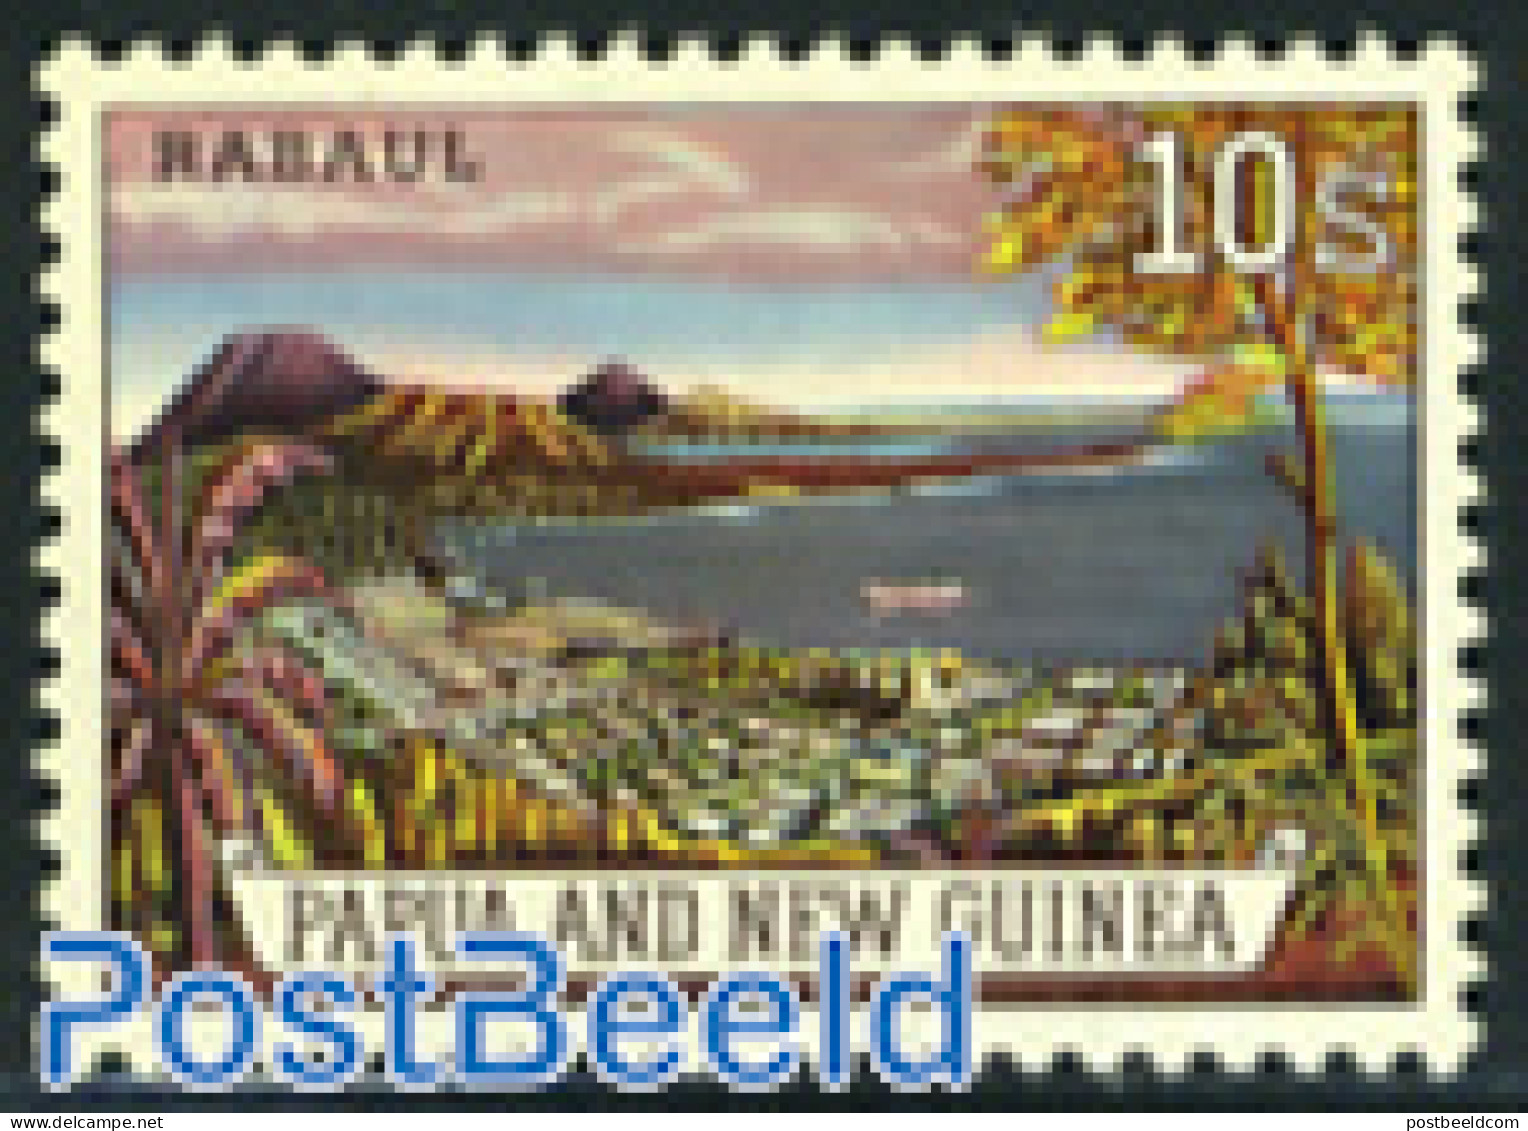 Papua New Guinea 1963 10Sh, Stamp Out Of Set, Mint NH - Papua New Guinea